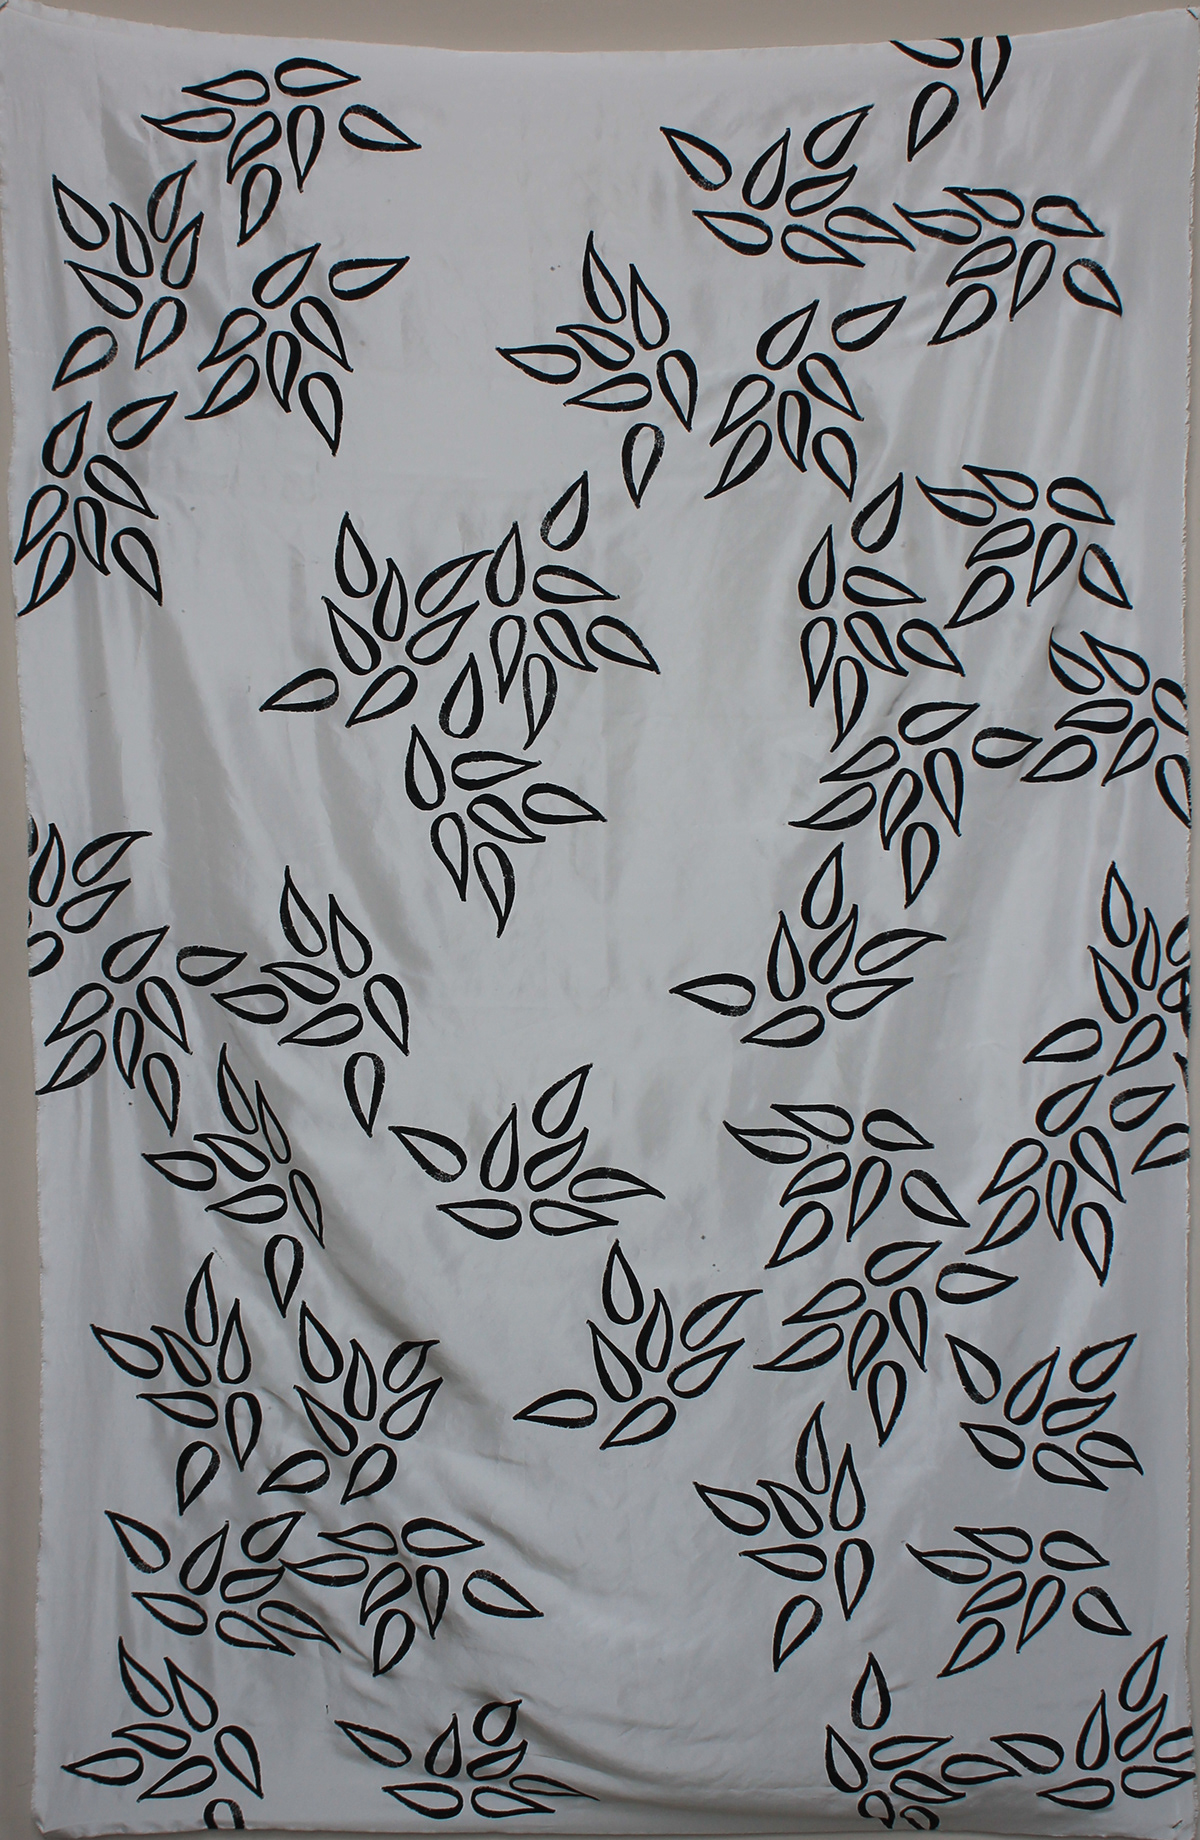 textile textiledesign interiors blackandwhite greyscale floral leaf leaves pattern leafpattern SILK cotton surfacedesign surfacetextiles